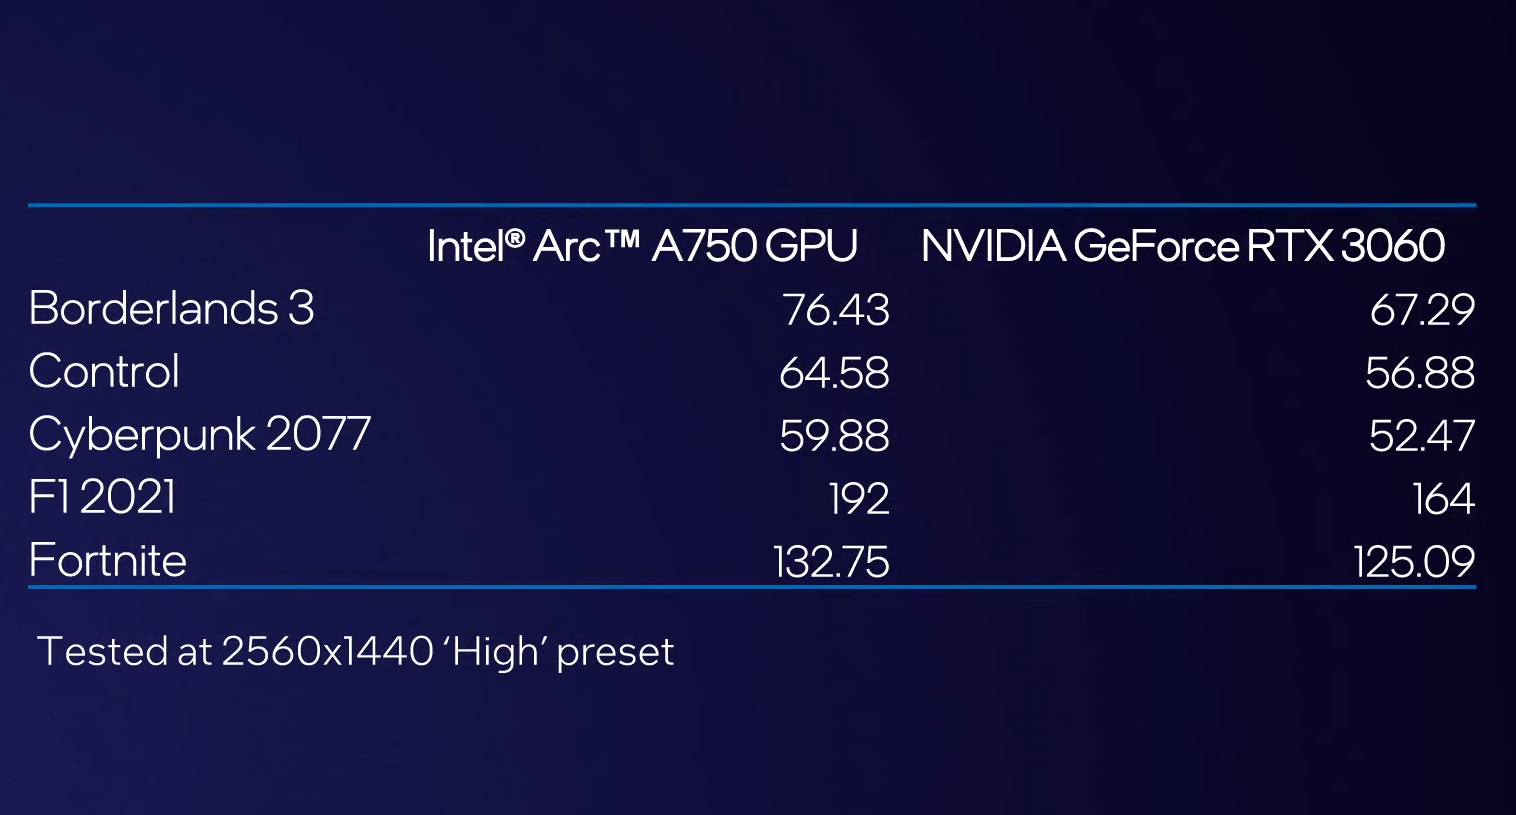 Intel Arc A750 Limited Edition Graphics Card Performance Showcase 2-58 screenshot (1).png